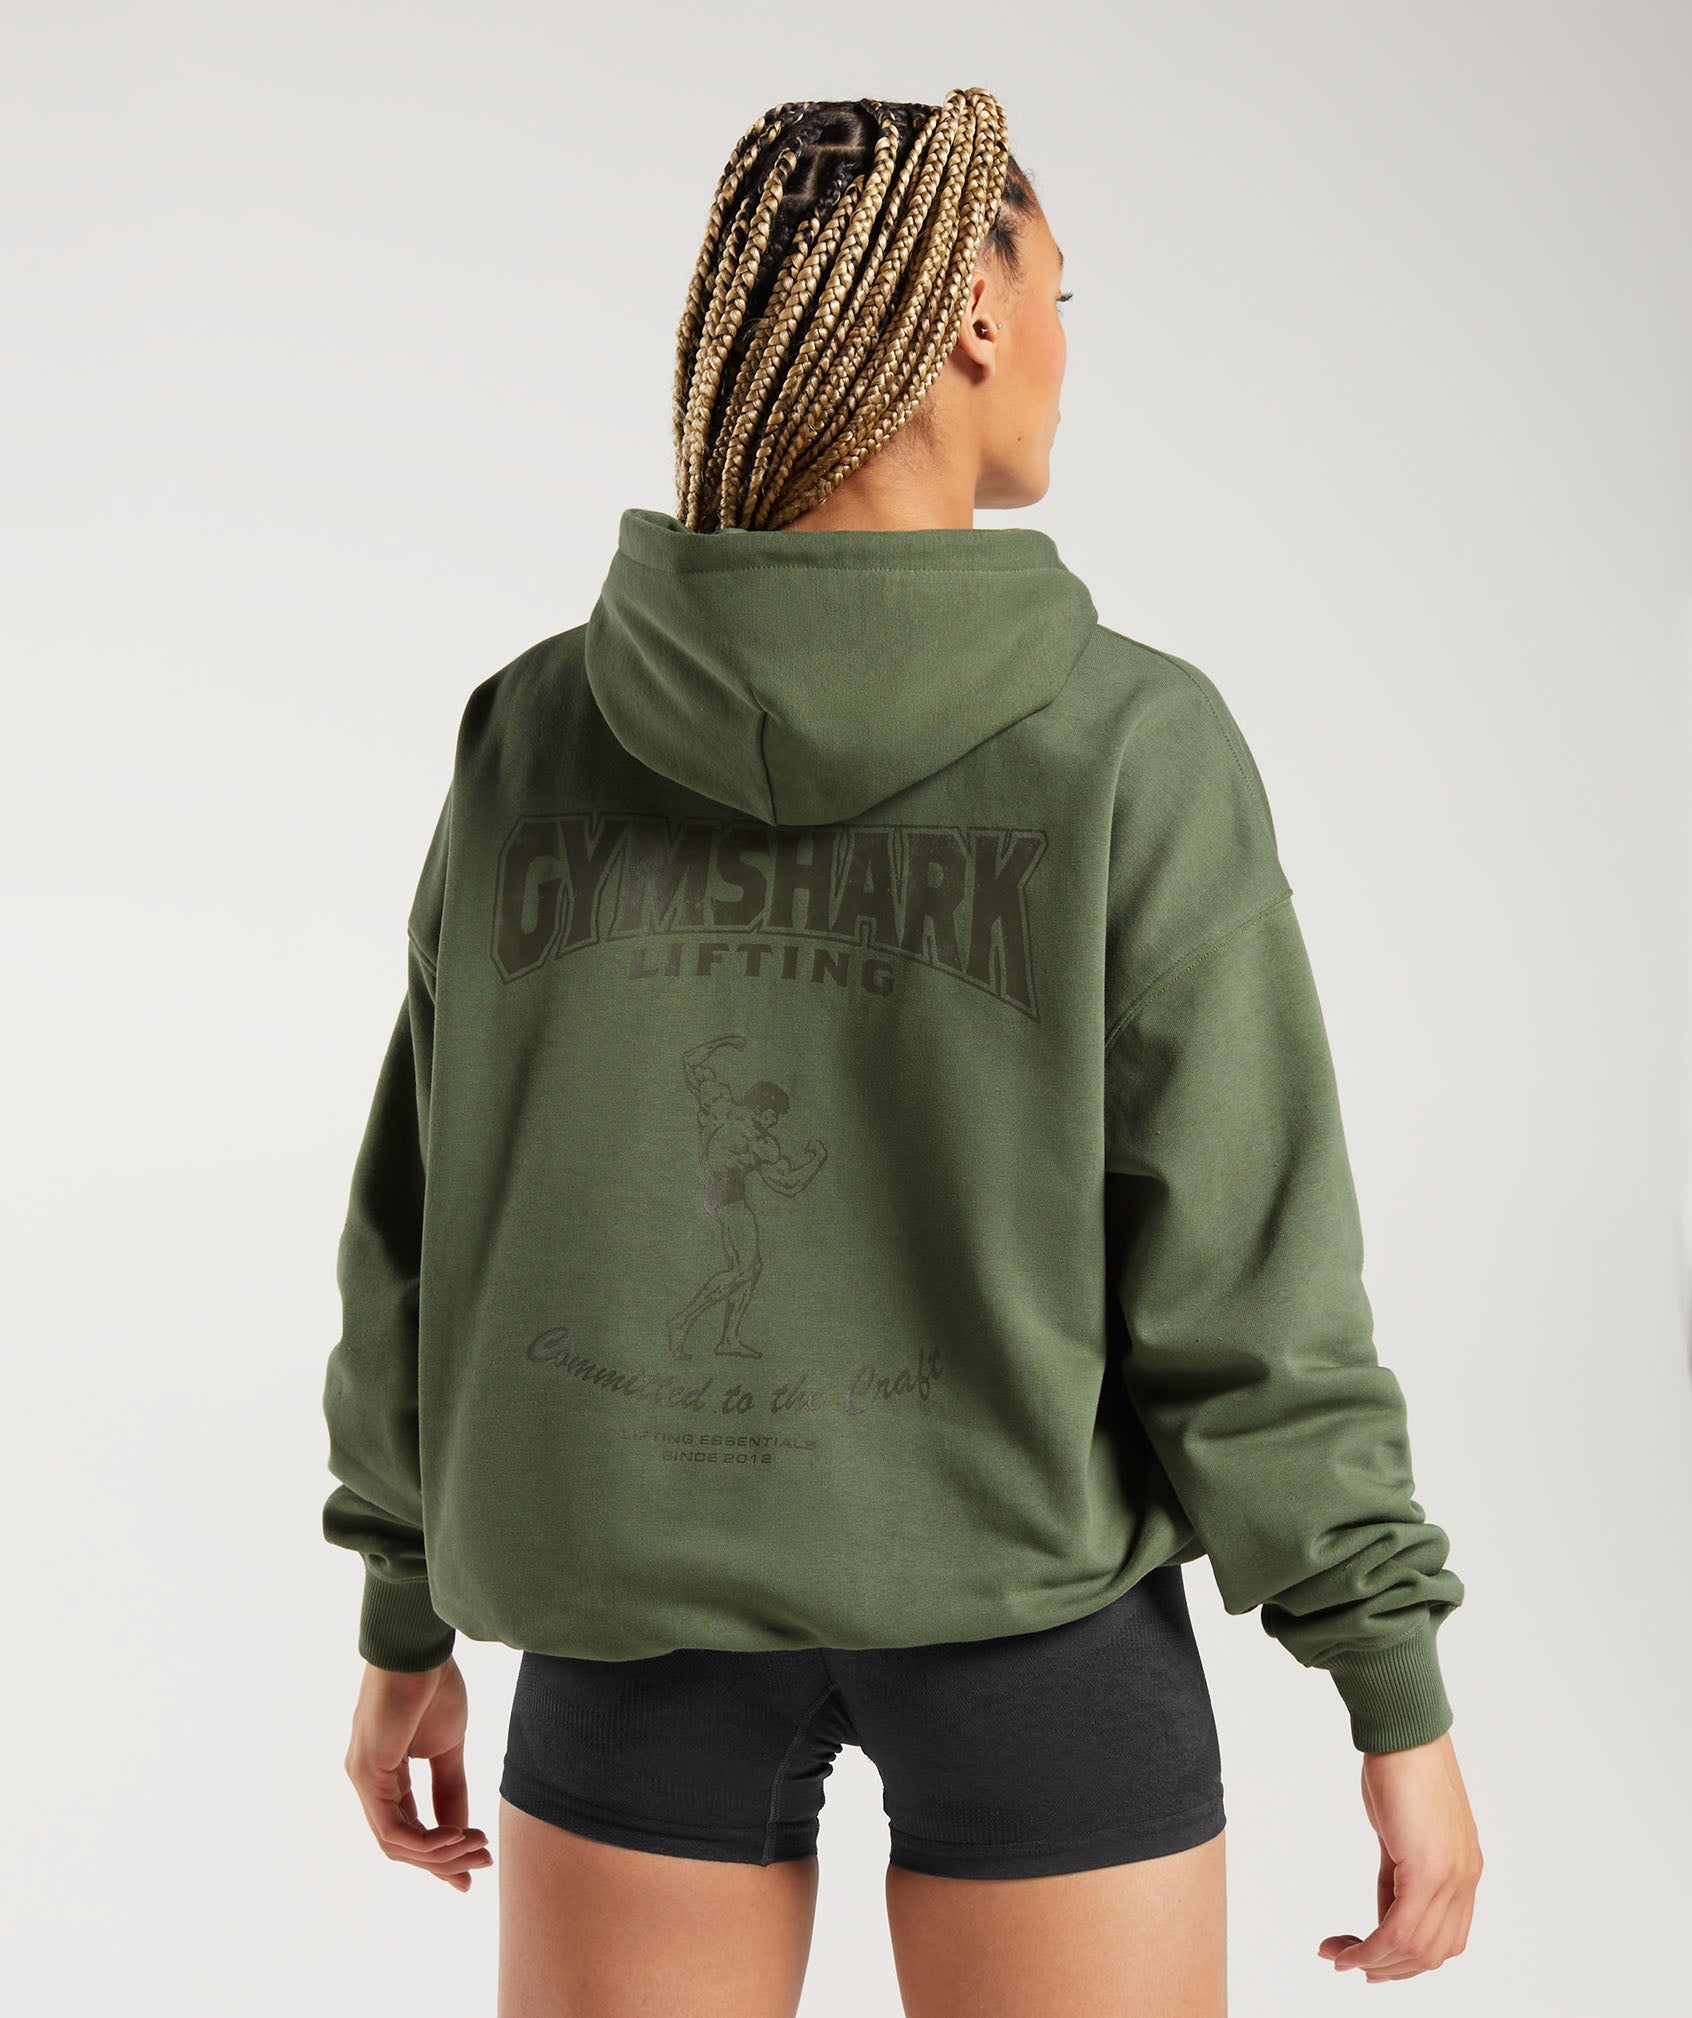 Committed To The Craft Hoodie in Green - view 1